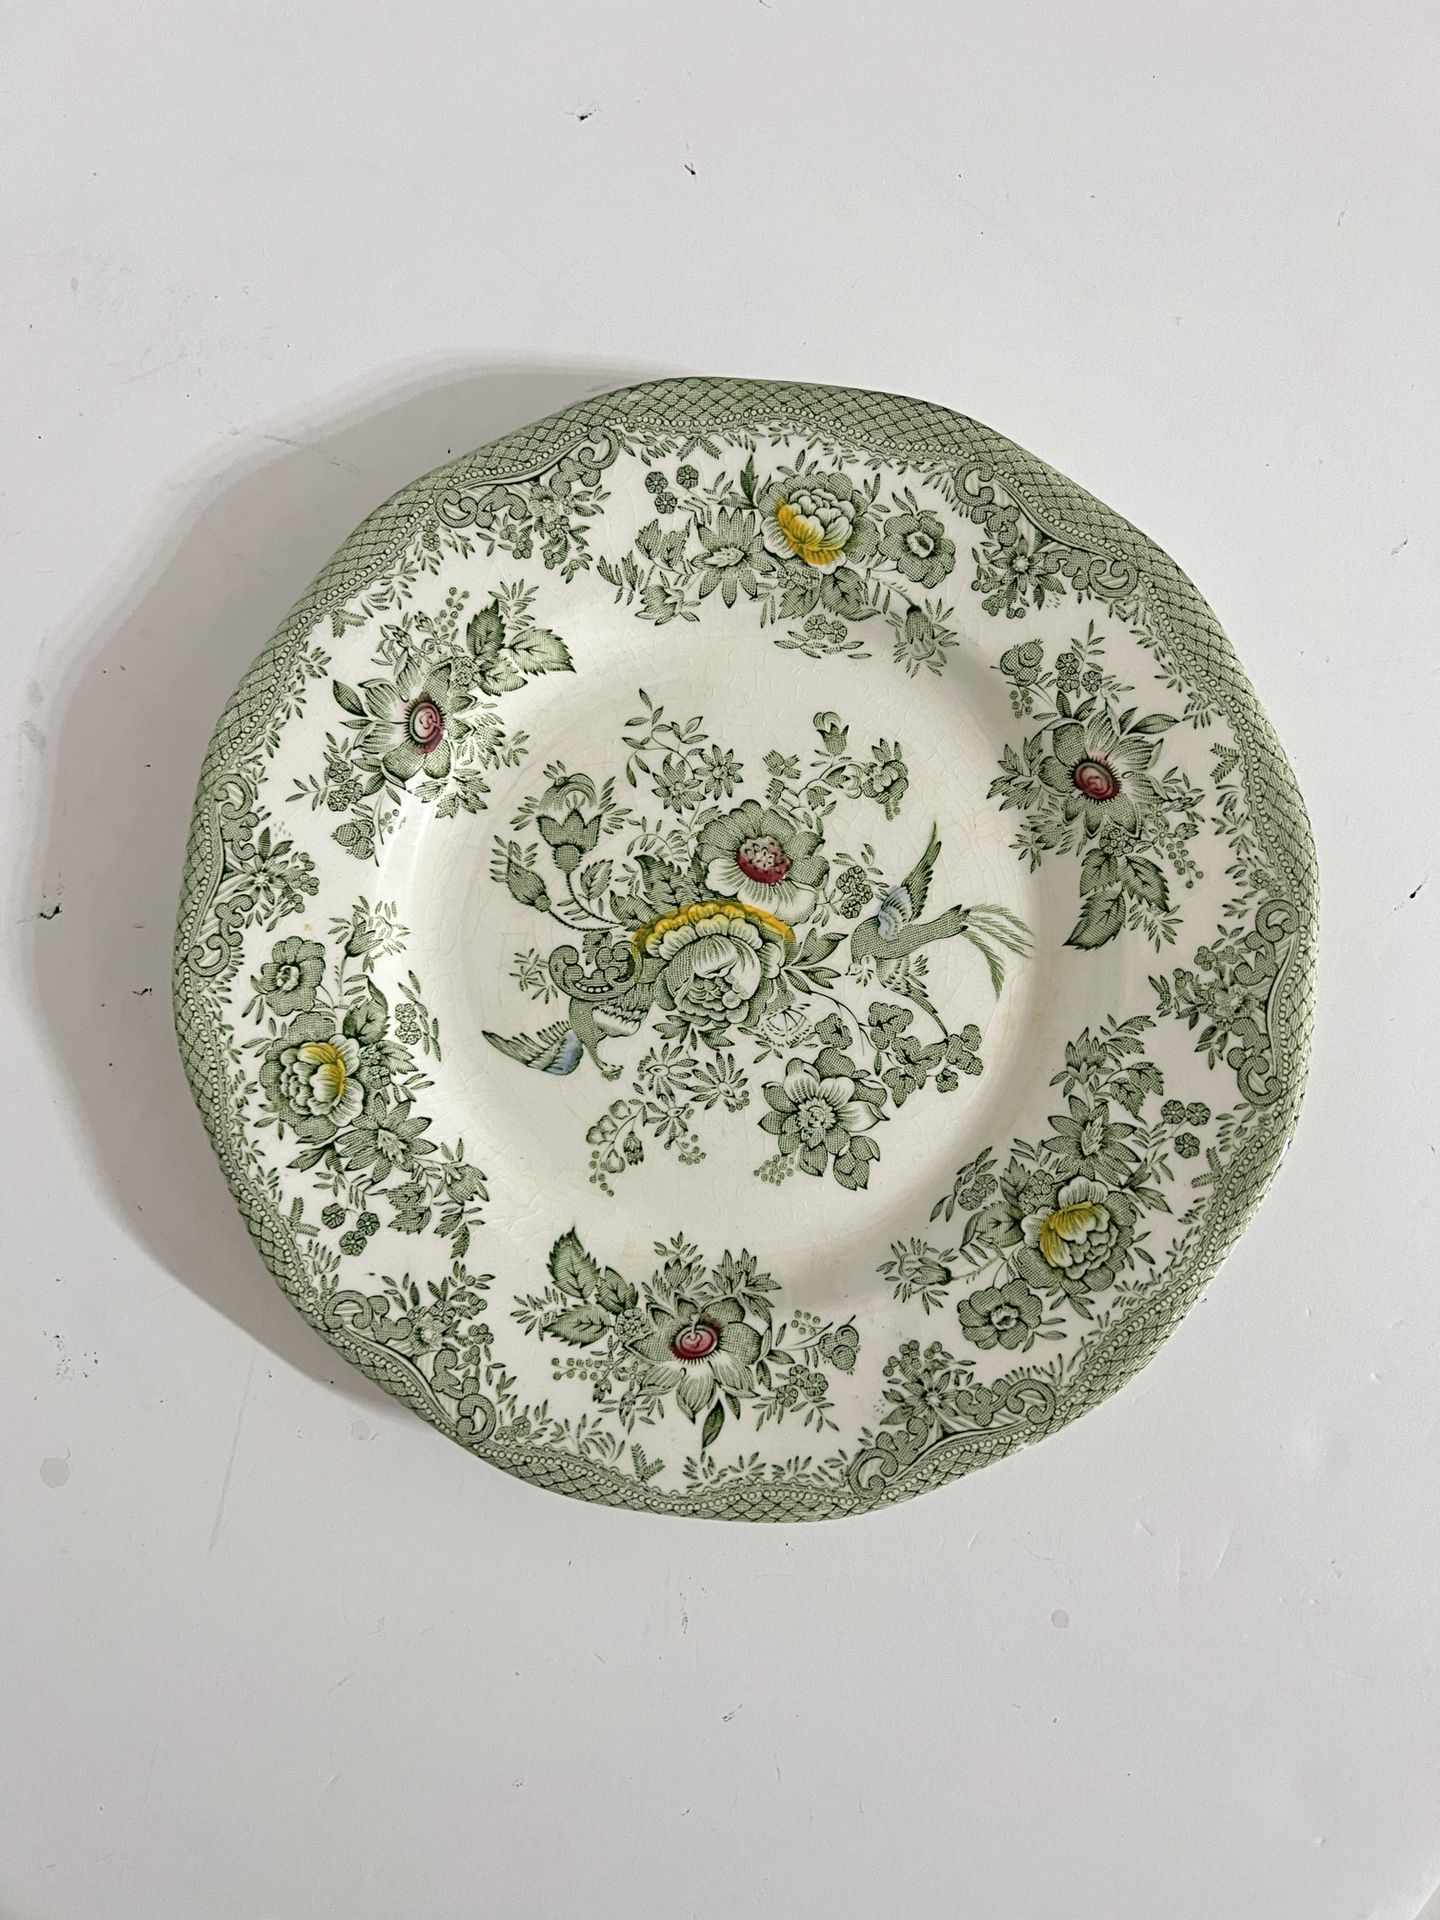 6-7/8” Rare Enoch Wedgwood Kent Bread Dessert Plate Hand Engraving  Decorated Underglaze for Sale in Livermore, CA - OfferUp